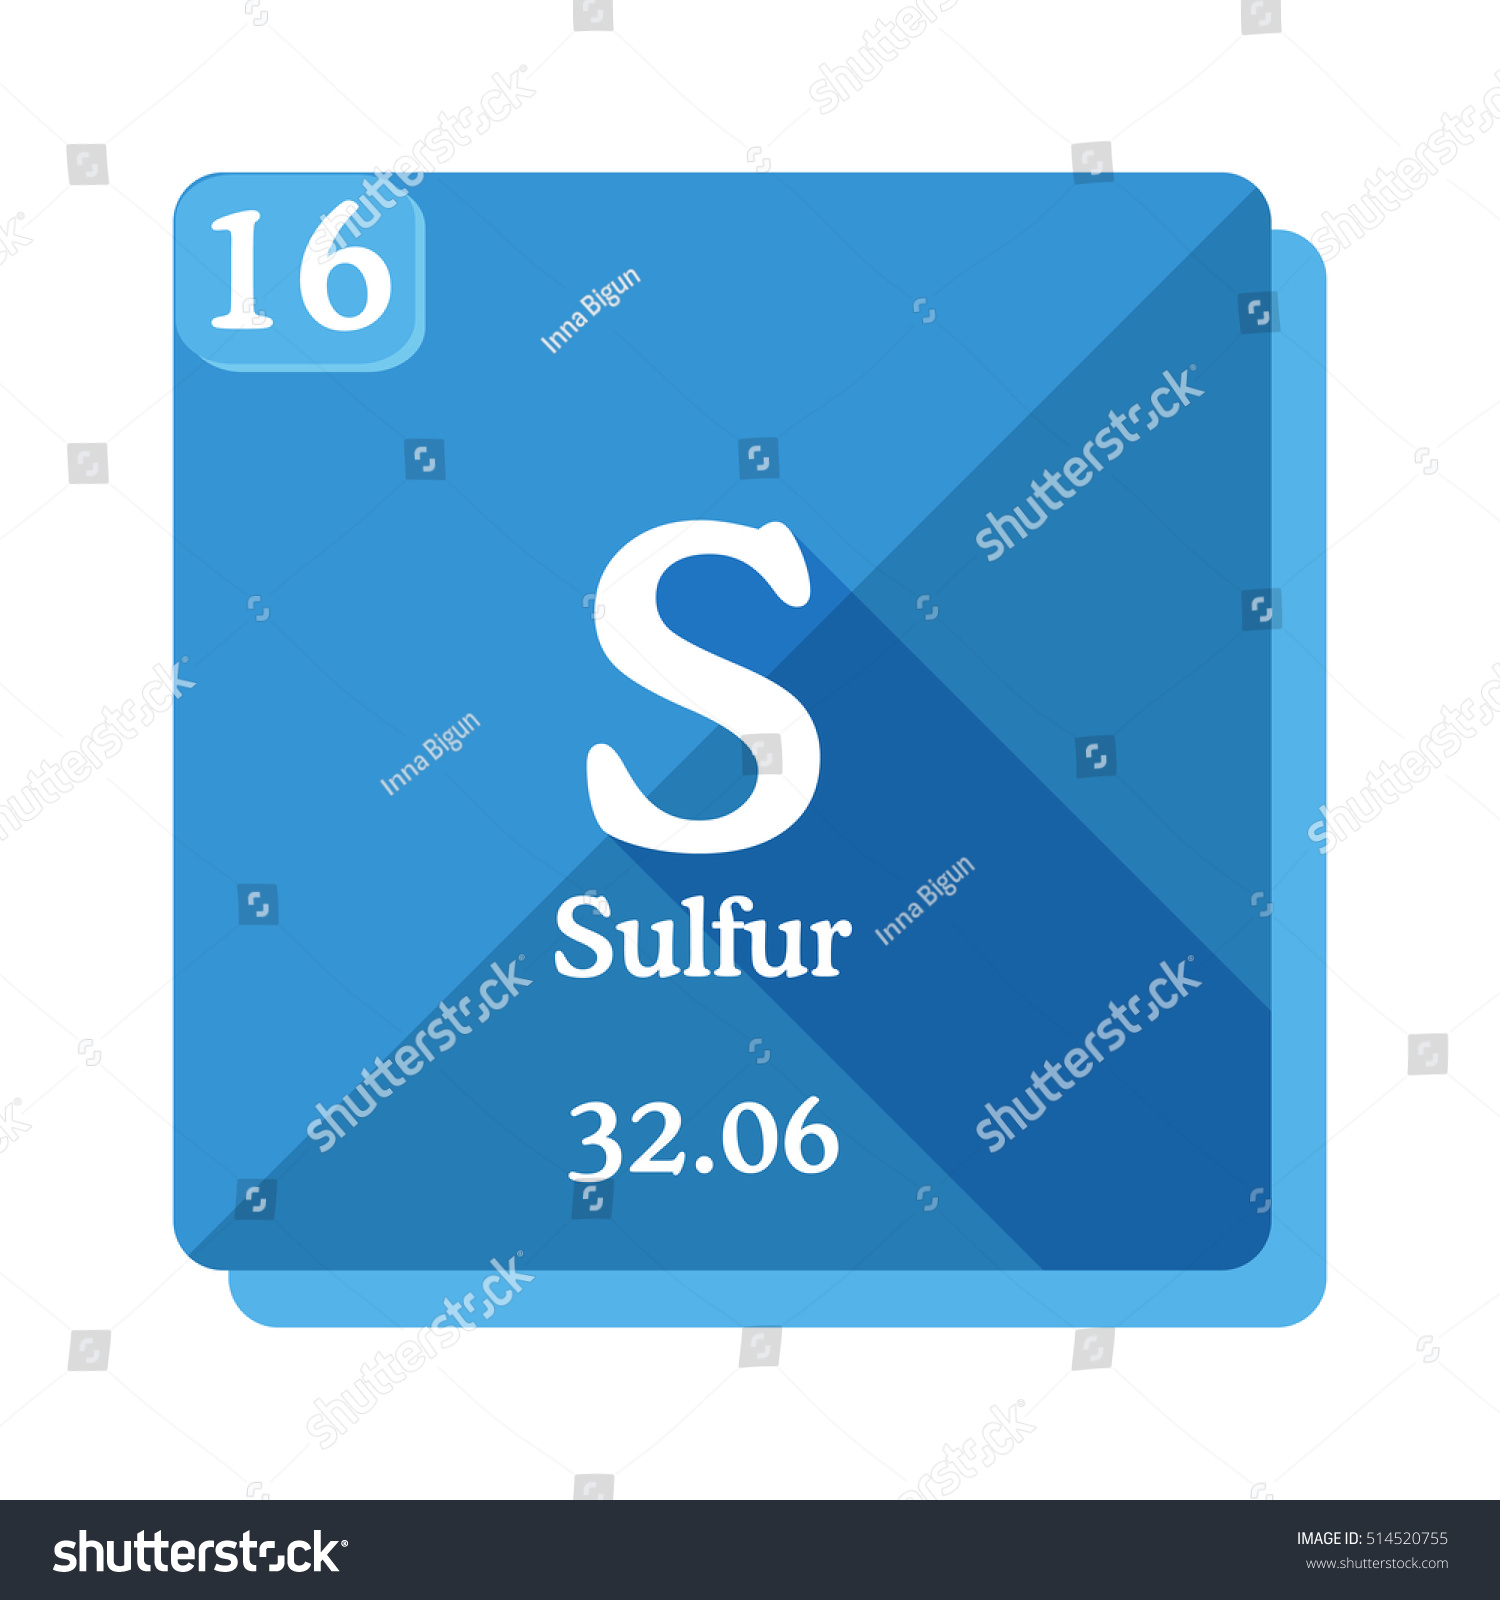 Sulfur S Element Periodic Table Flat Stock Vector Royalty Free 514520755